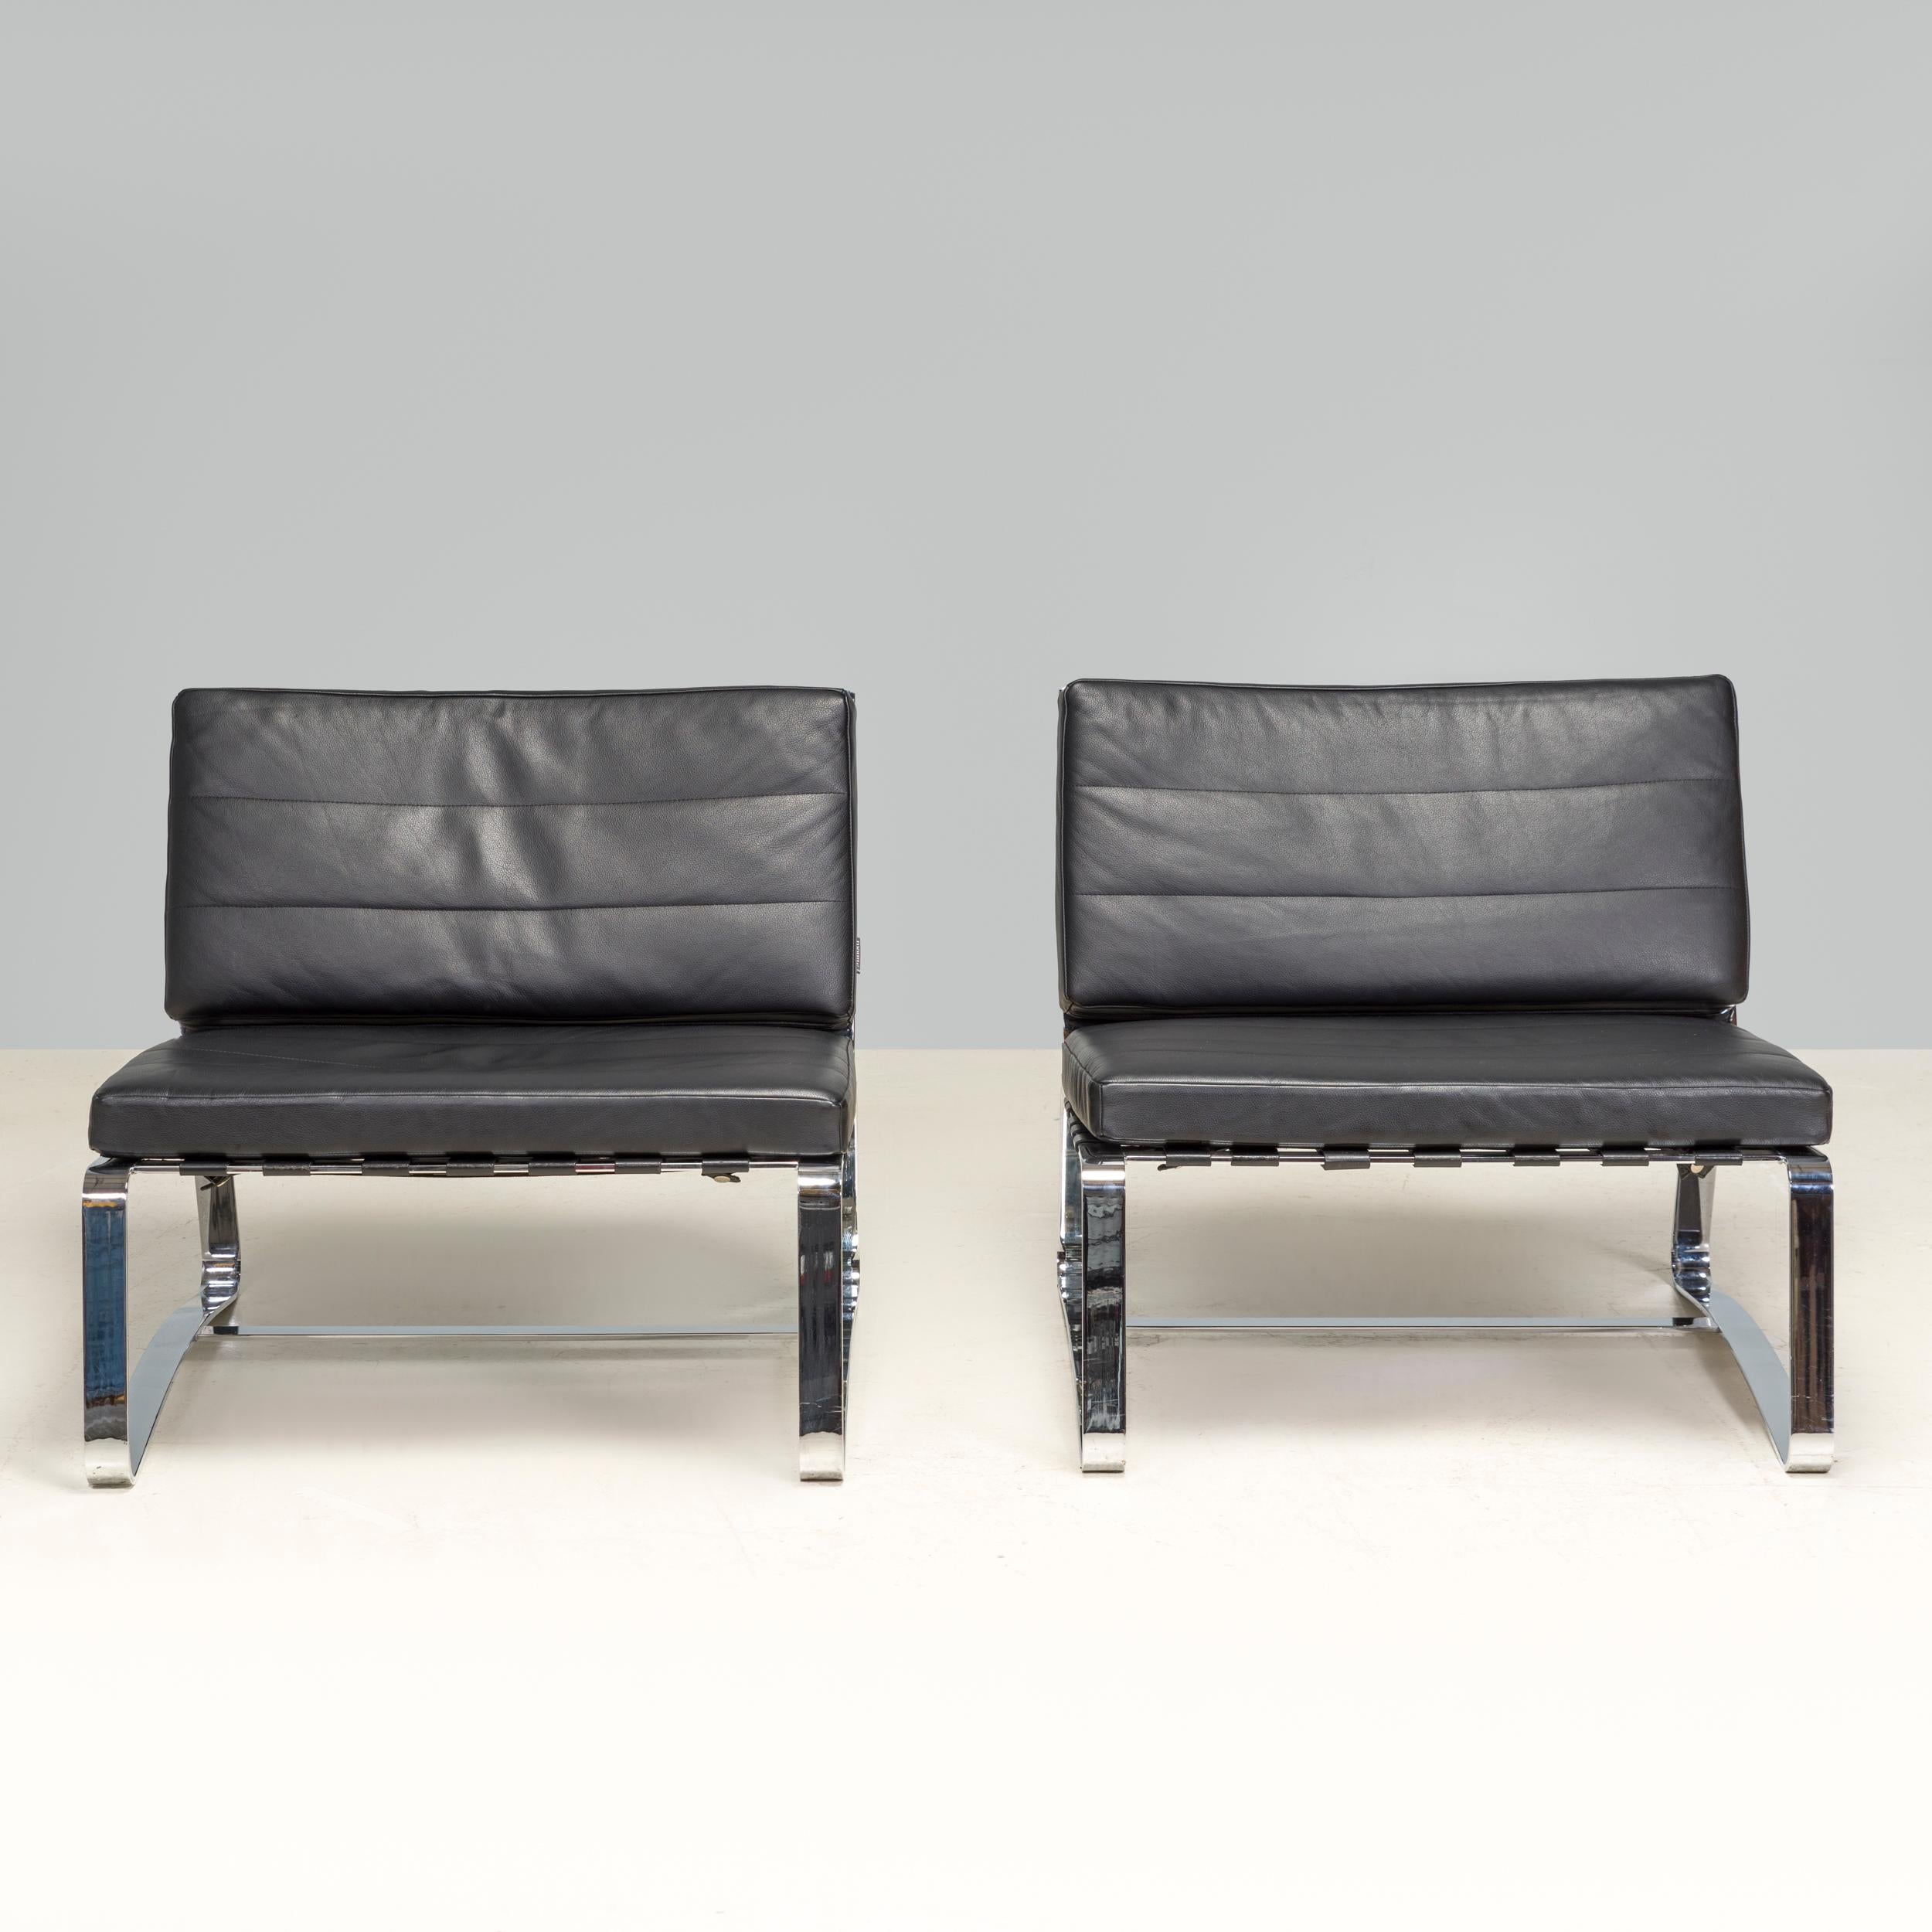 Originally designed by Rodolfo Dordoni in 1998 and manufactured by Minotti, the Delaunay lounge chair is a fantastic example of minimalist 90s design.

Constructed from a metal frame in a chrome plated finish, the chairs sit on low sled style legs